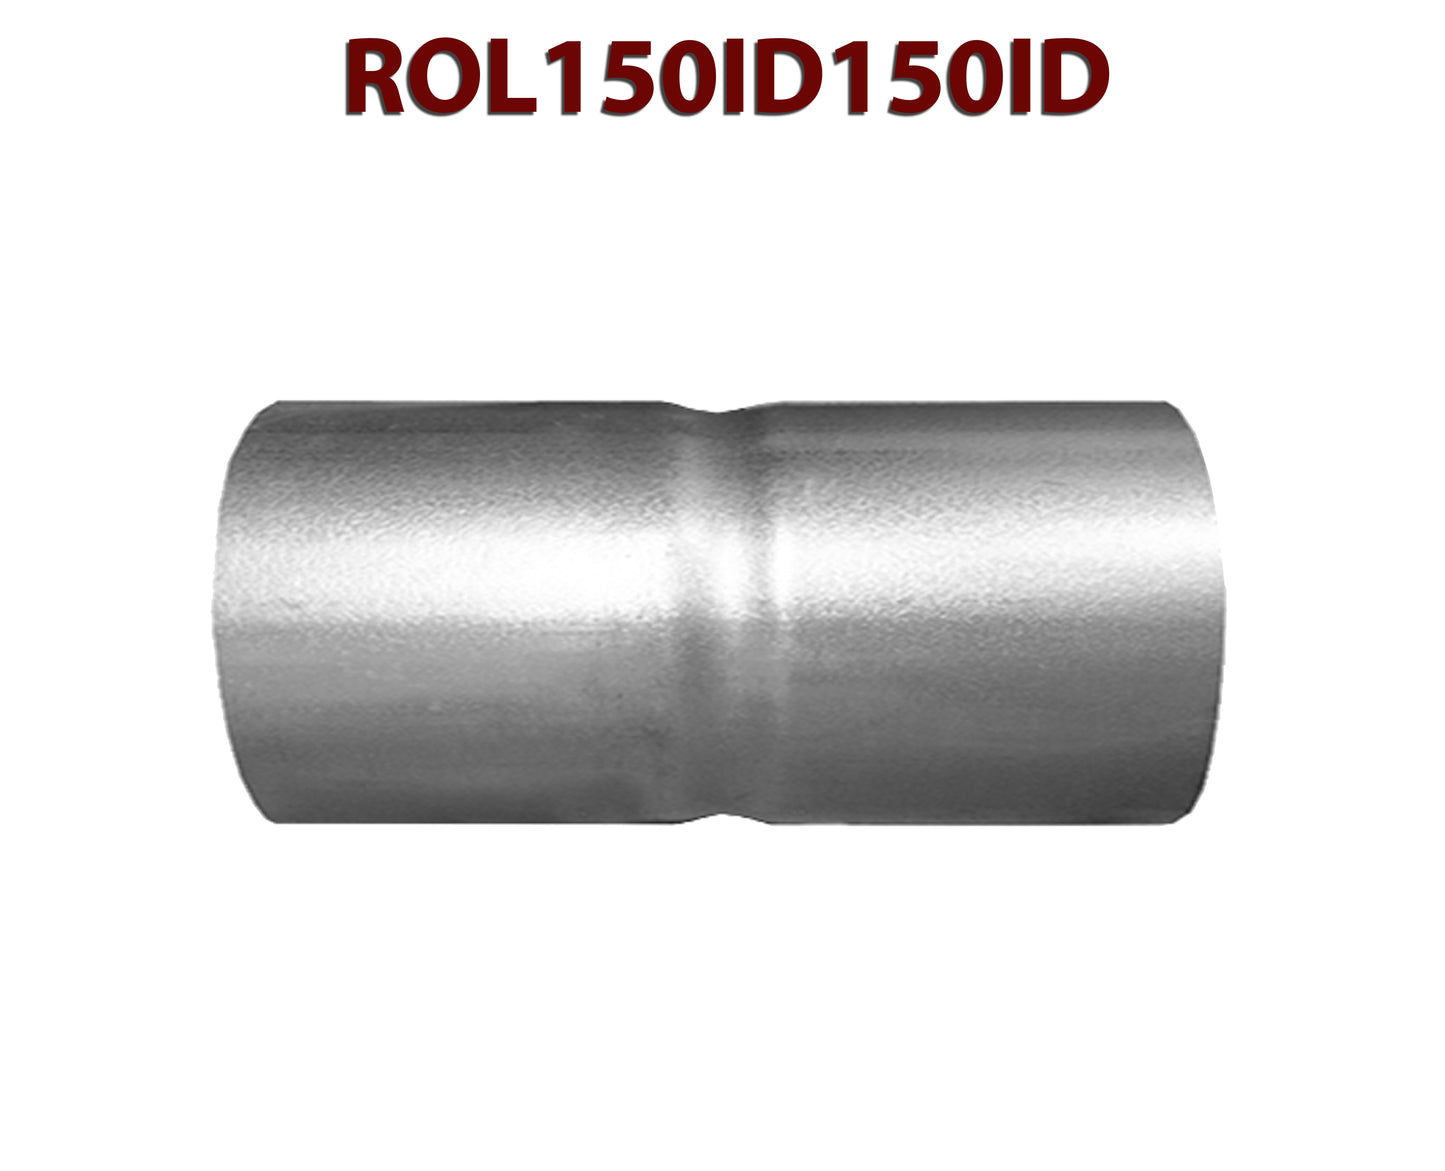 ROL150ID150ID 548519 1 1/2” ID to 1 1/2” ID Universal Exhaust Pipe to Pipe Coupling Connector